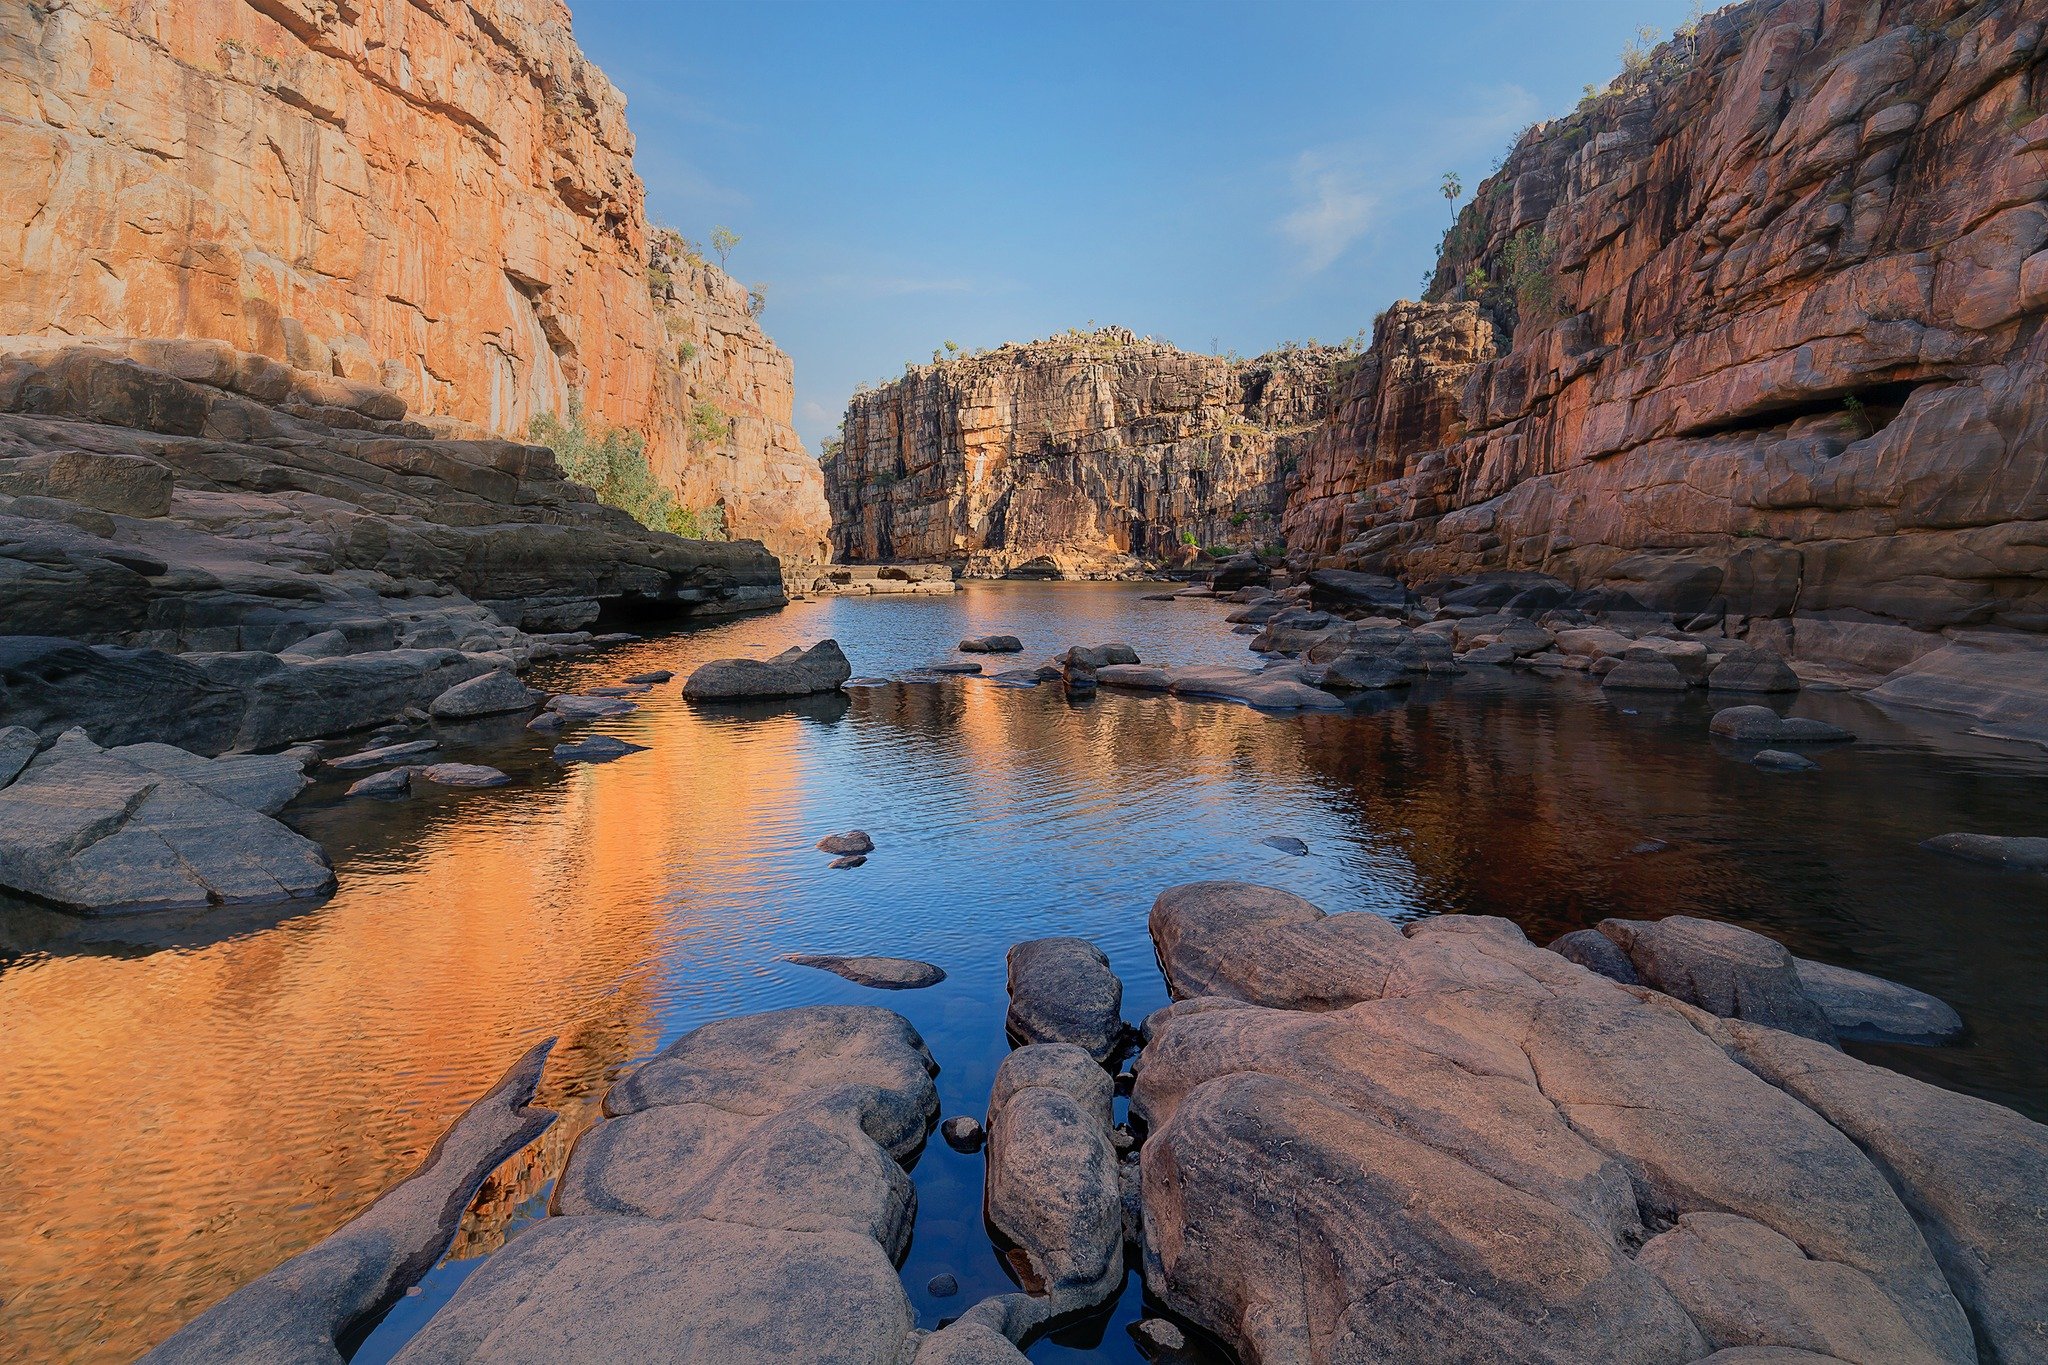 Here's another of my favourite Top End gorges - Nitmiluk!

Katherine Gorge is so easy to explore - this shot was captured a few years ago on a kayaking trip through to the 6th gorge - I camped on a beach just behind the cliff on the left of this imag